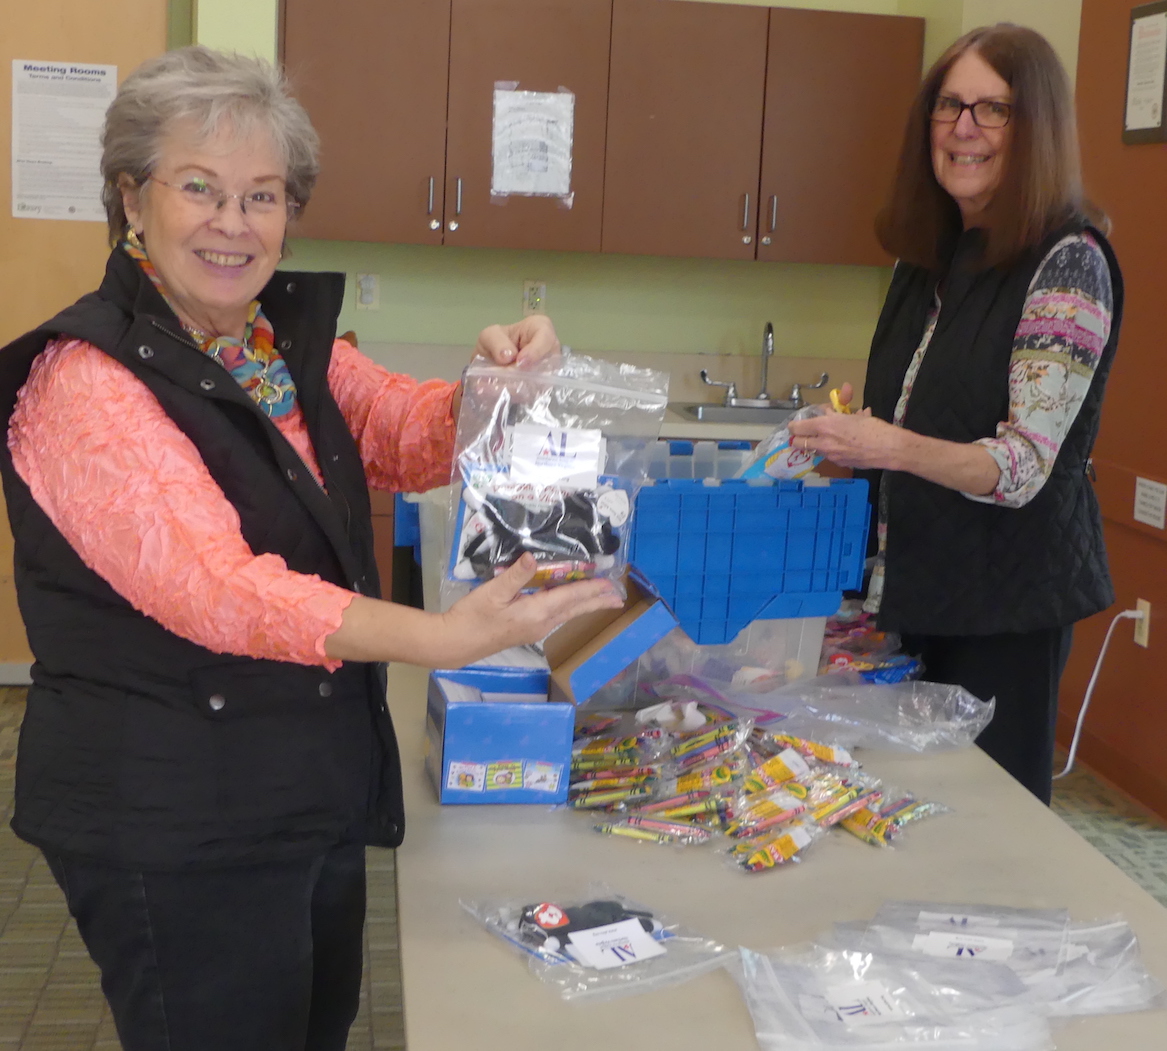 Two ALNV members show the bags that were prepared as part of their Bedtime Hugs event